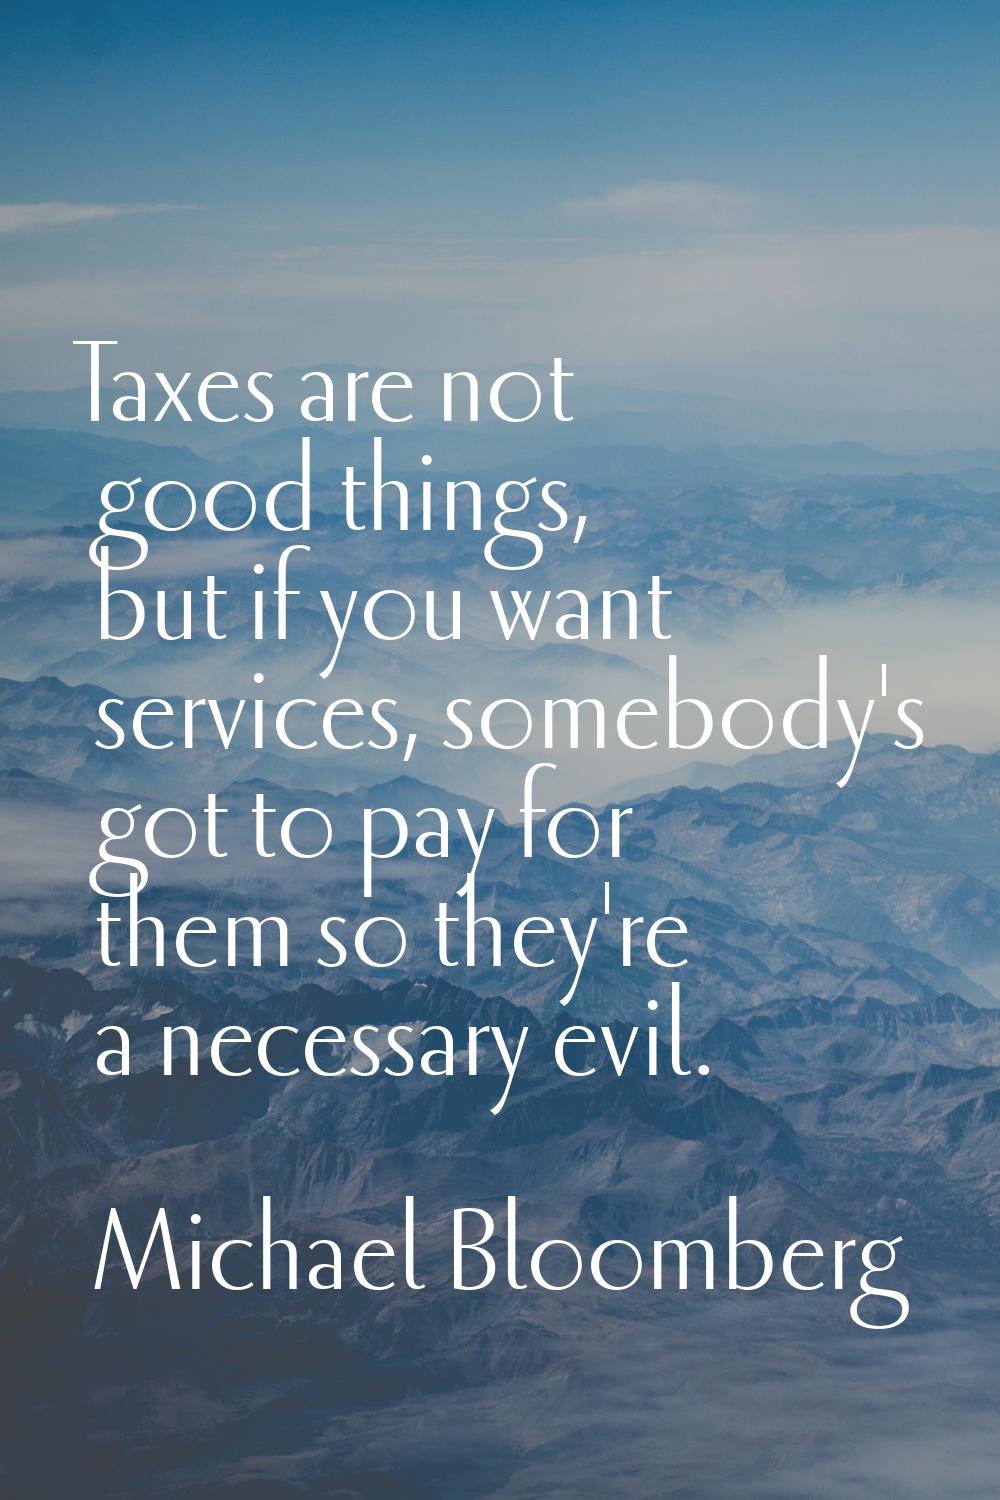 Taxes are not good things, but if you want services, somebody's got to pay for them so they're a ne